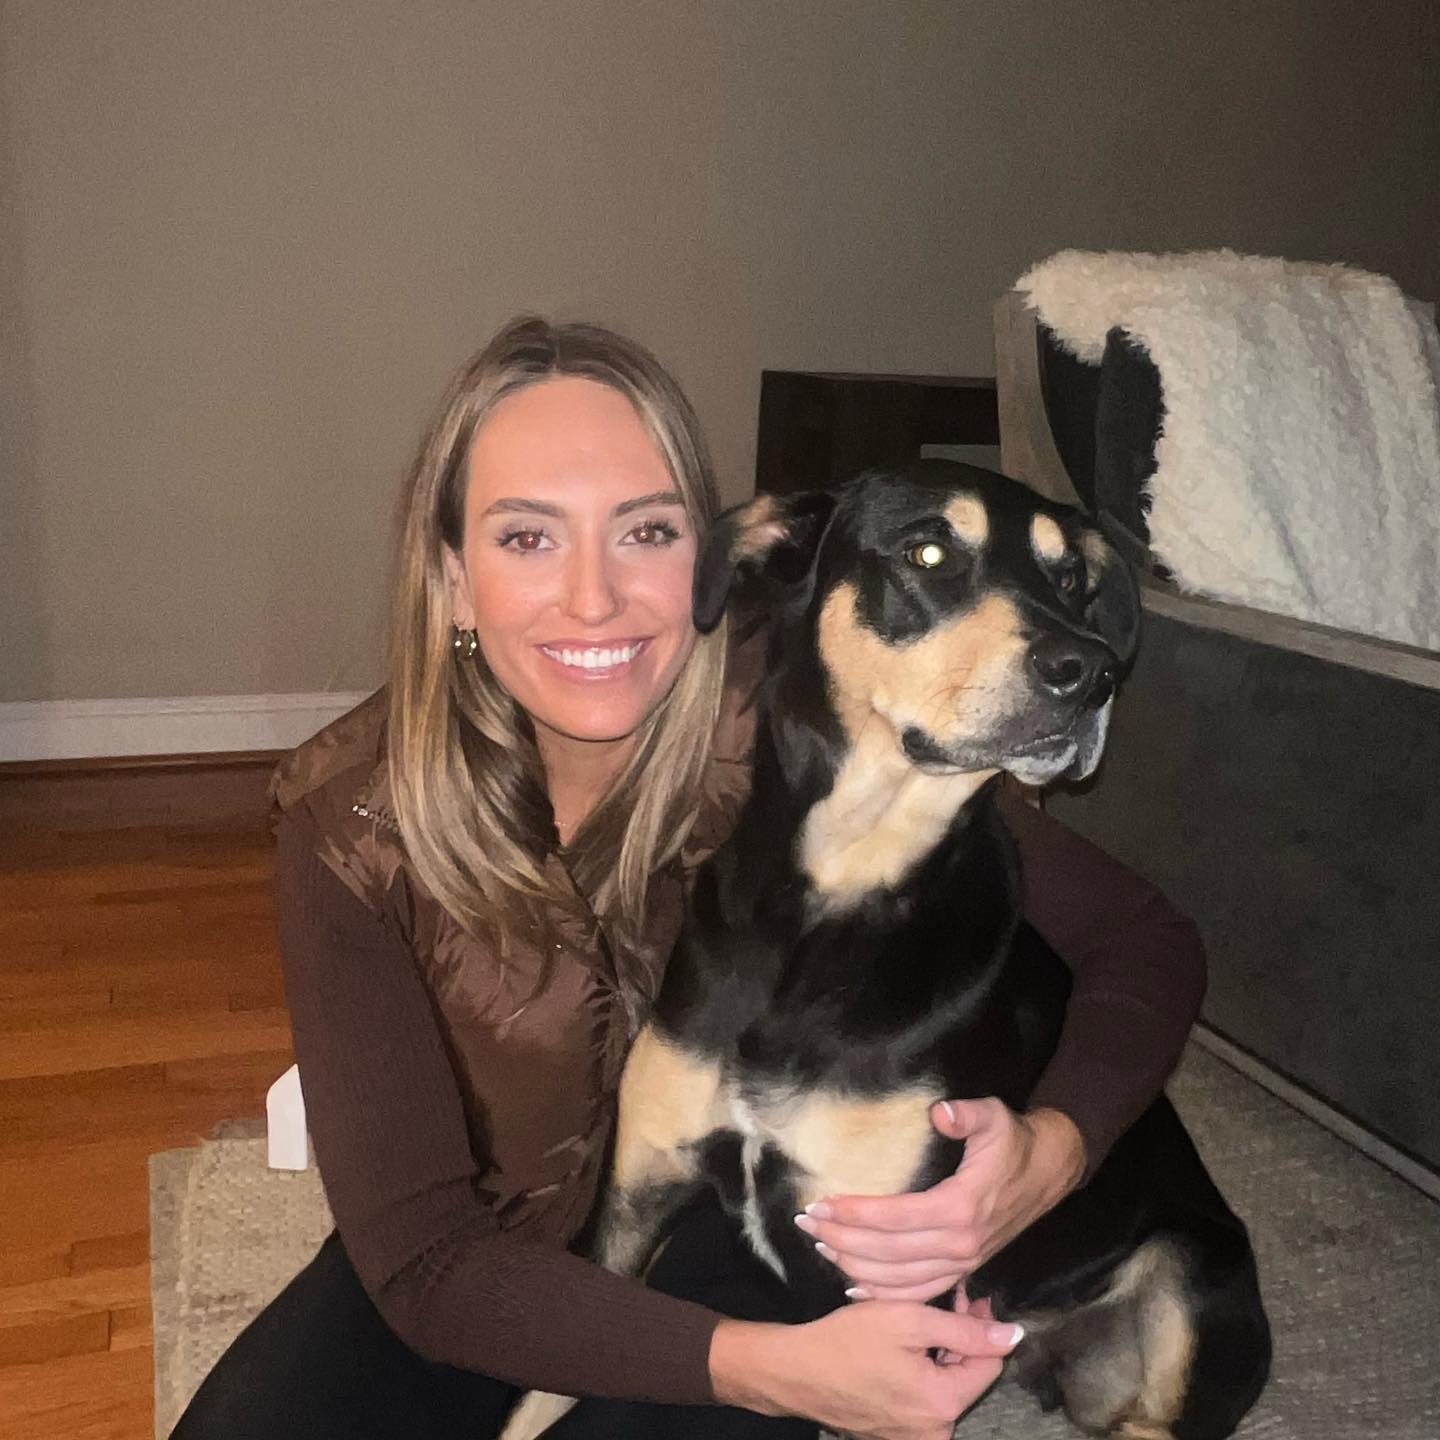 Meet the Super Bowl 2023 WAGs cheering on the Chiefs and Eagles